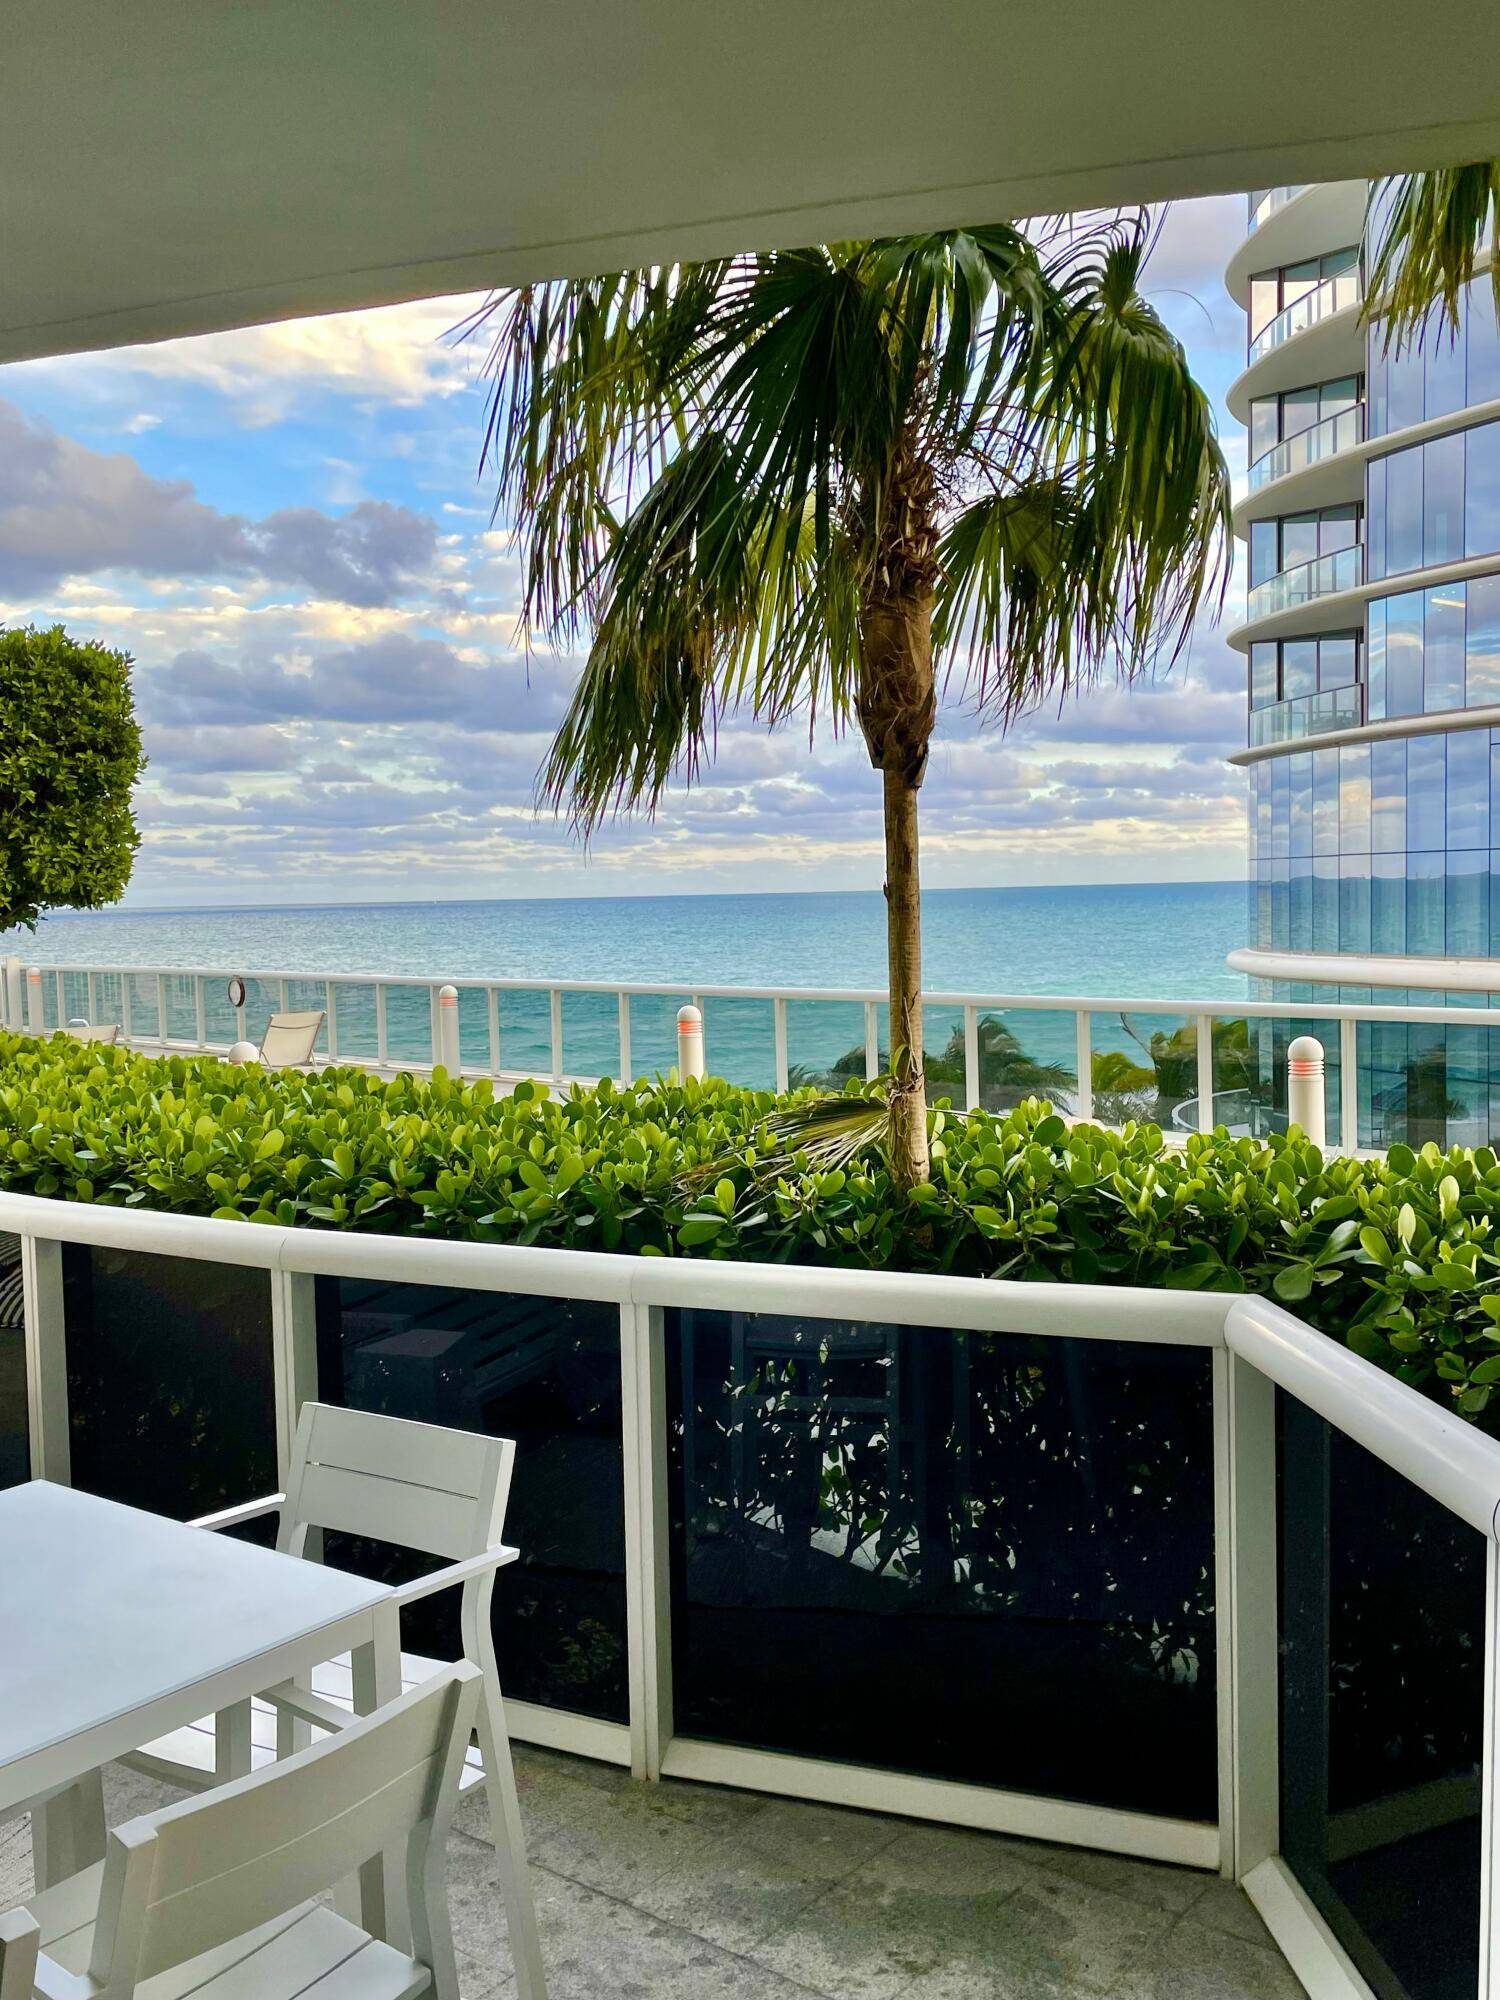 Beautiful Trump Tower III Fully Furnished, Large 2 2 ensuite located on same level as the spa, private gate opens to small pool and terrace over looking the beach.